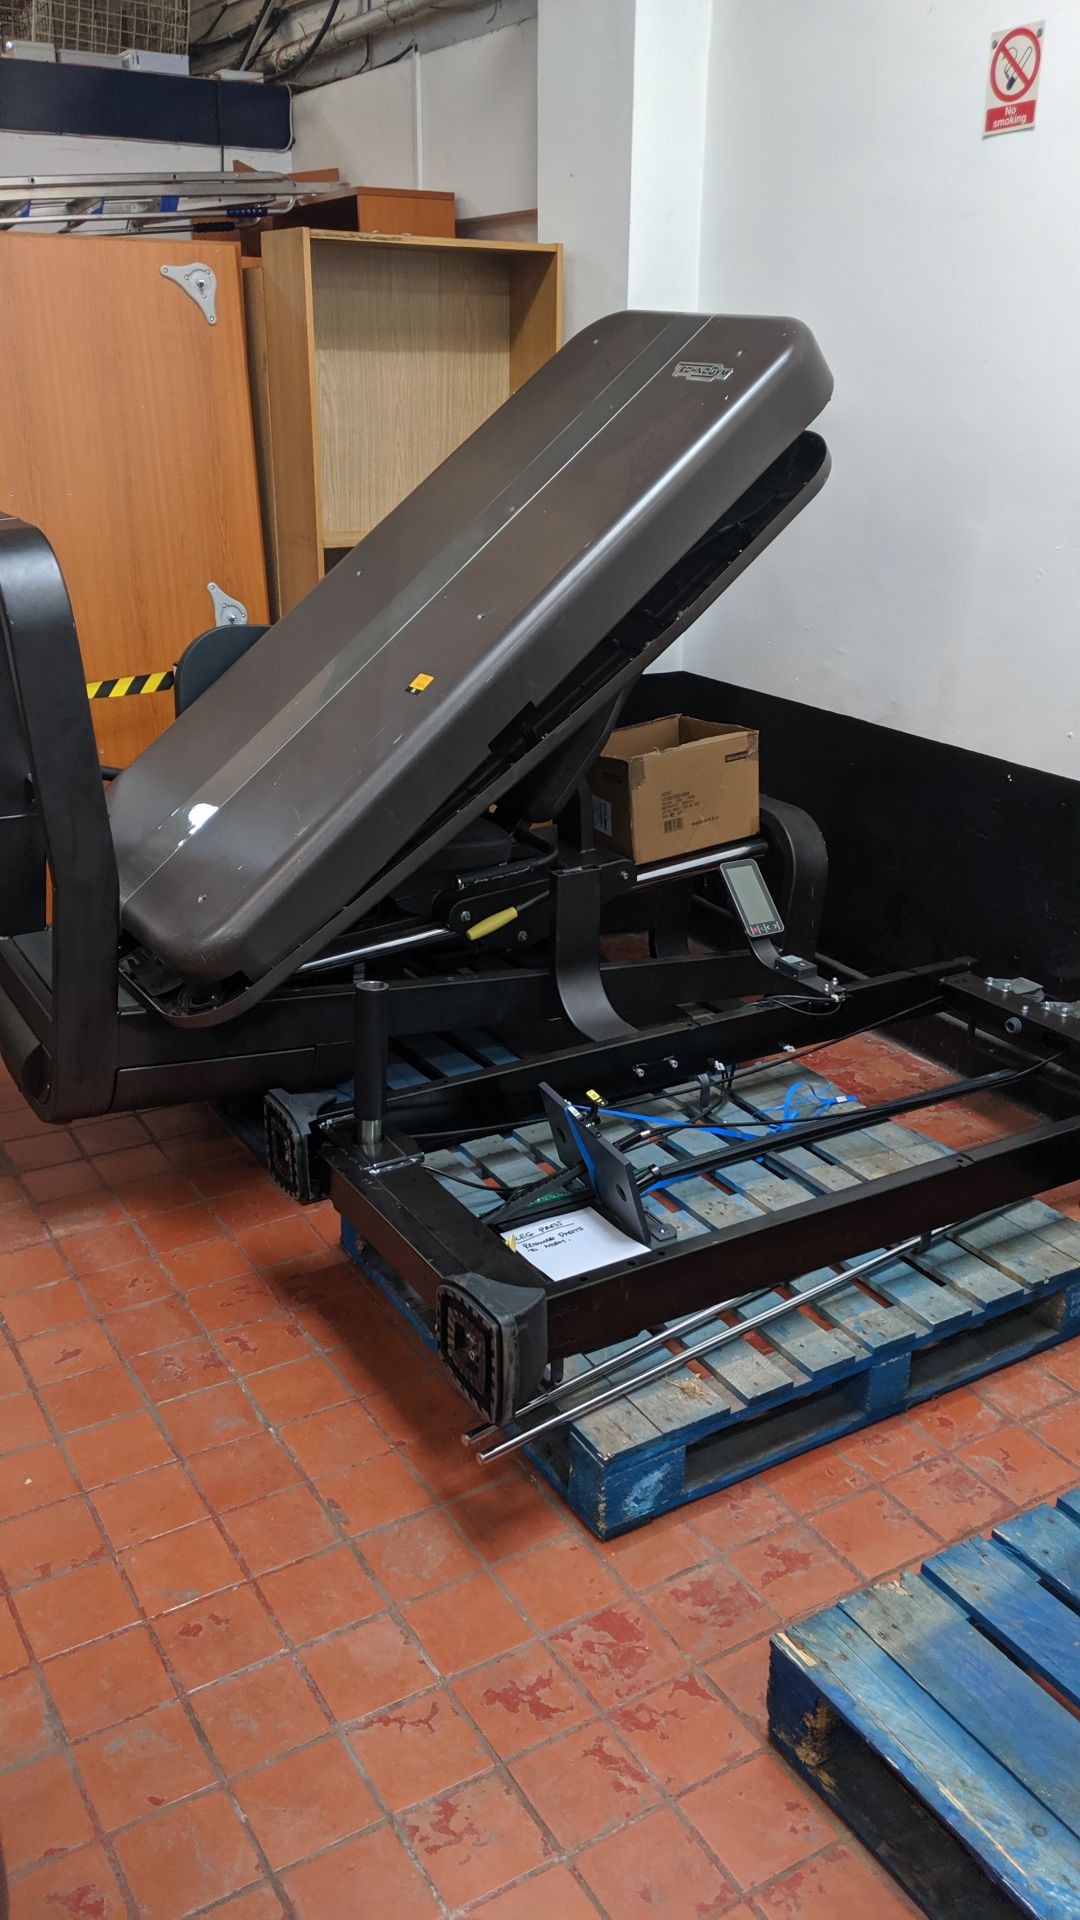 Technogym leg press - this item is currently located across two pallets. It is understood to have